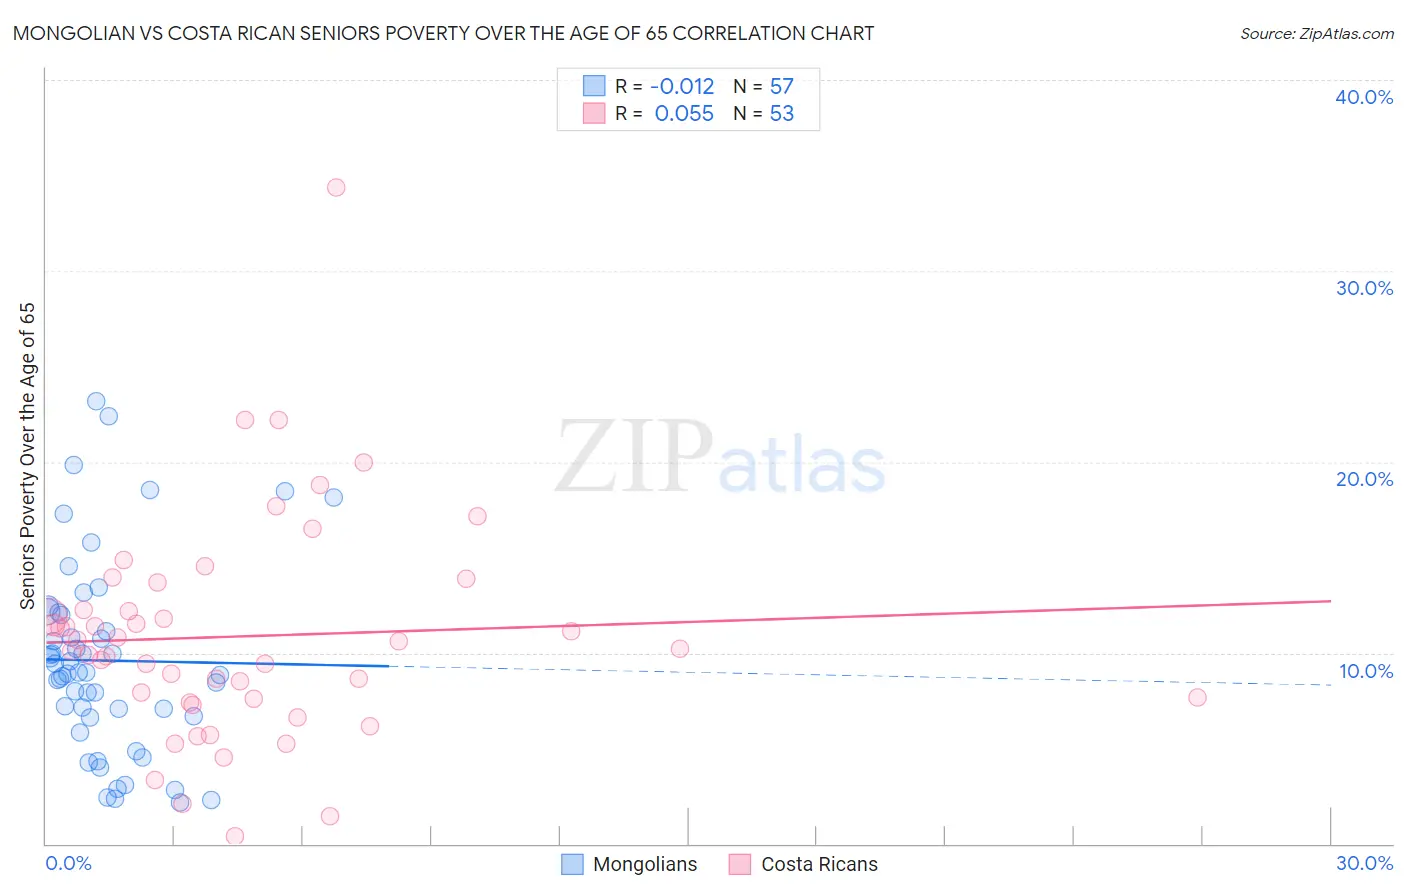 Mongolian vs Costa Rican Seniors Poverty Over the Age of 65